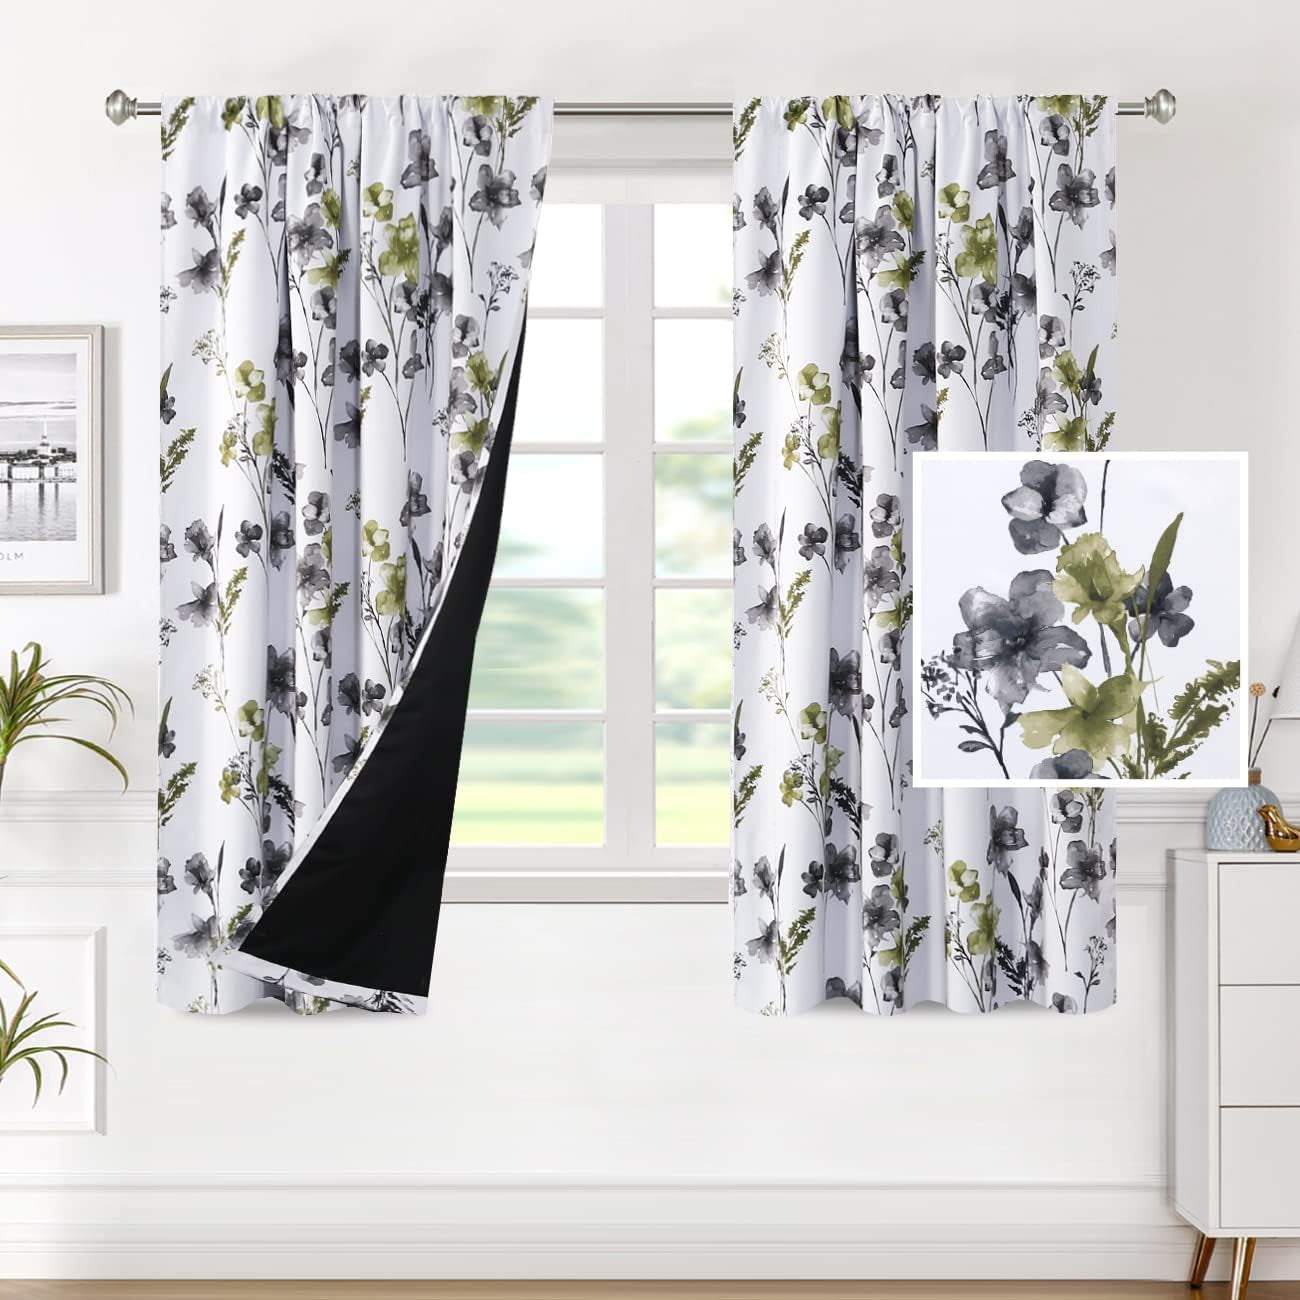 H.VERSAILTEX 100% Blackout Curtains for Bedroom Cattleya Floral Printed Drapes 84 Inches Long Leah Floral Pattern Full Light Blocking Drapes with Black Liner Rod Pocket 2 Panels, Navy/Taupe  H.VERSAILTEX Grey/Olive 52"W X 63"L 